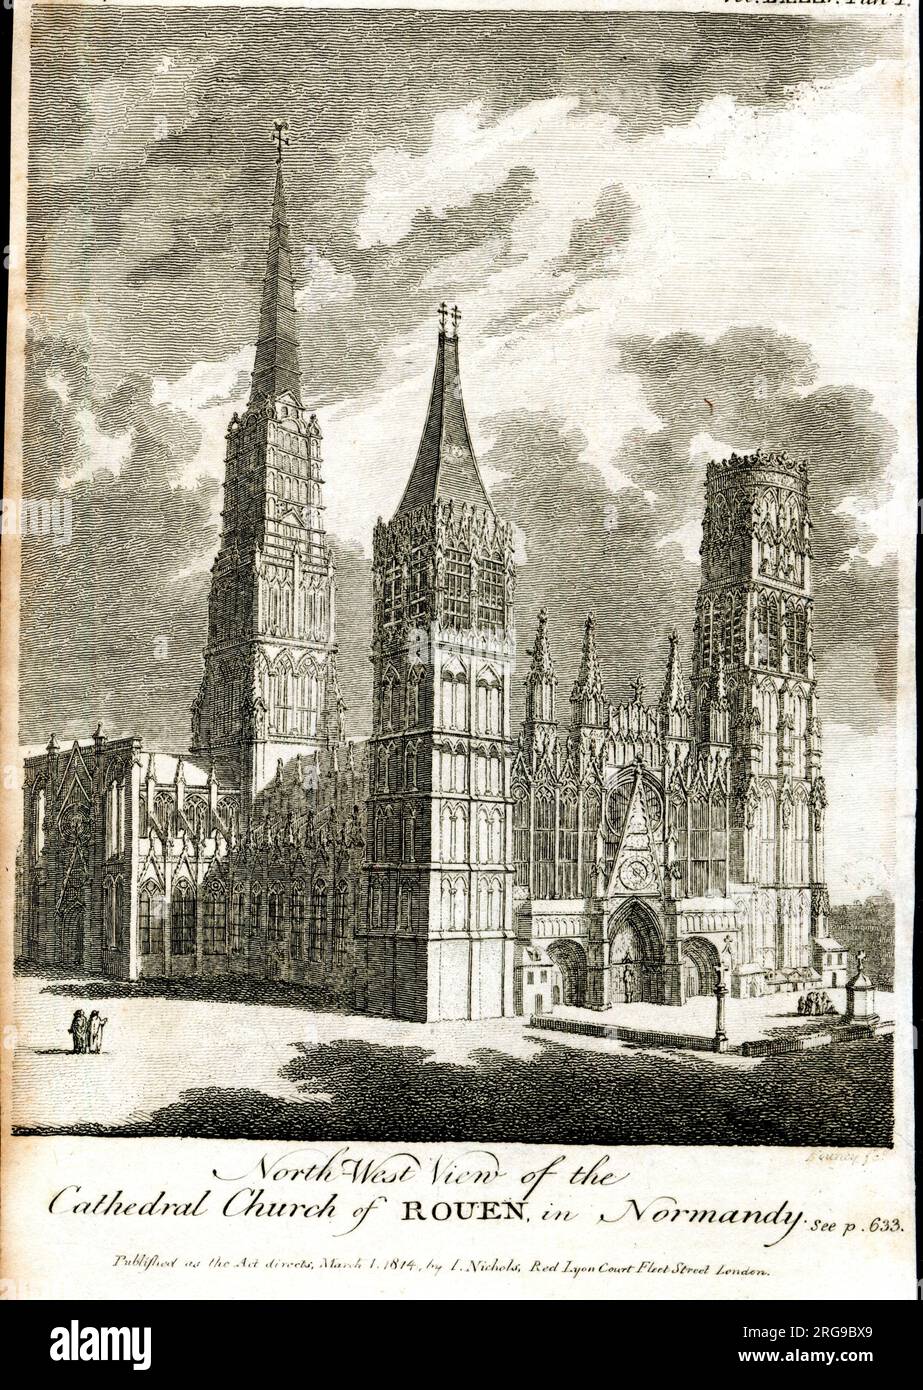 North West View Roen Cathedral, Normandy - The Gentleman's Magazine March 1814 Stock Photo